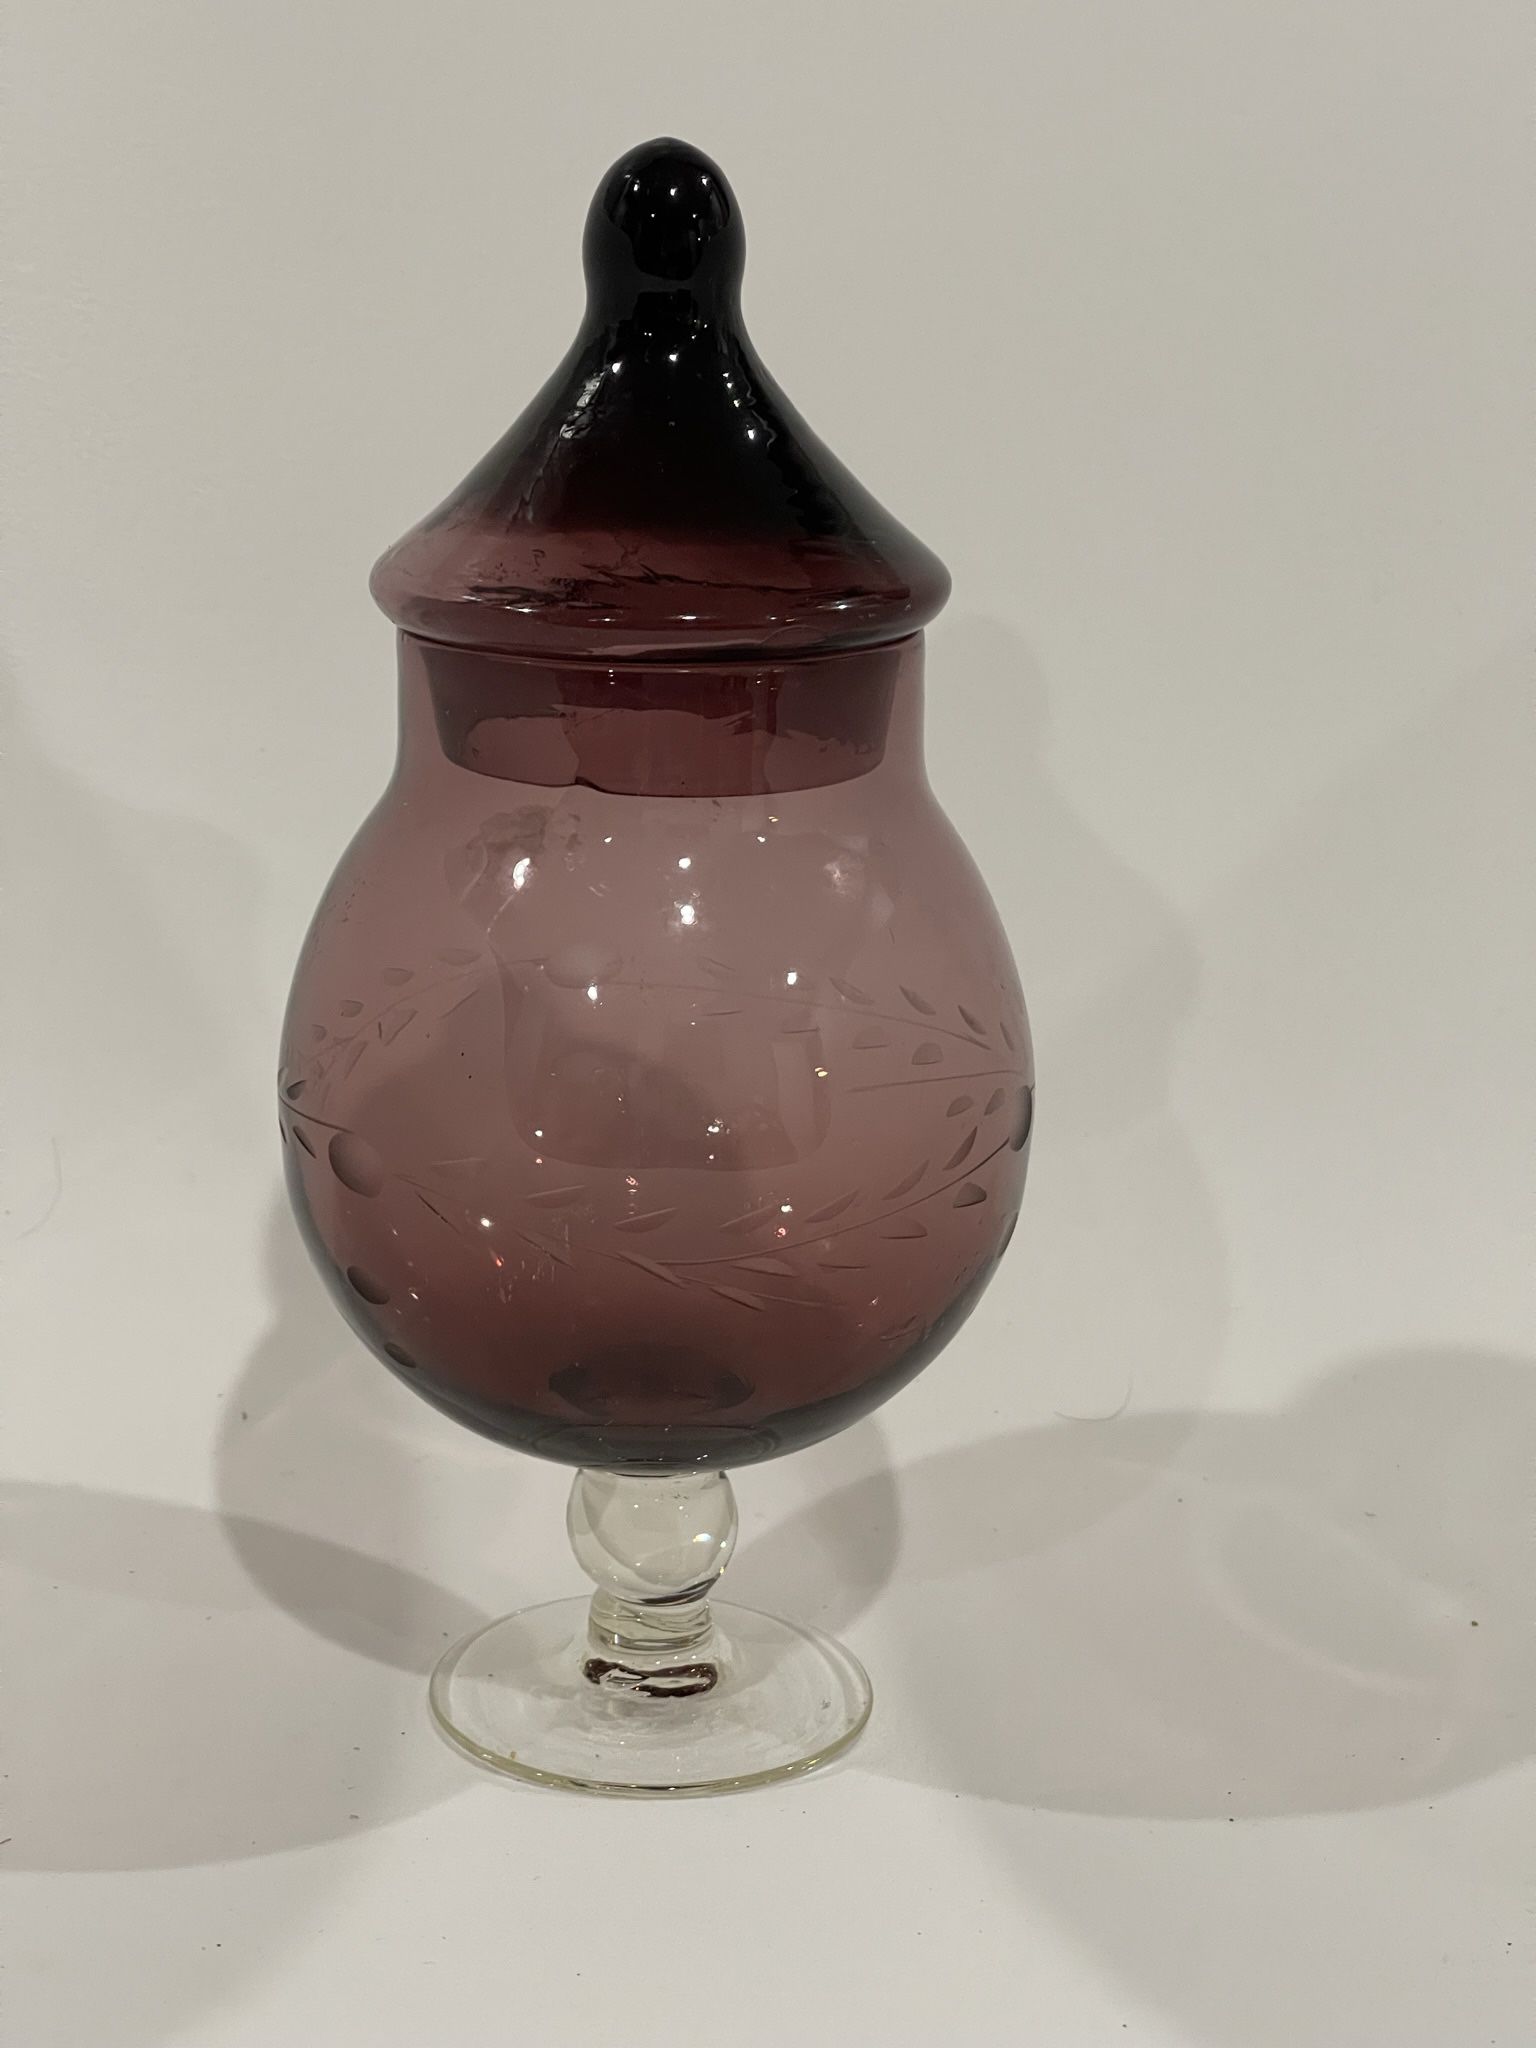 Vintage Etched Glass Amethyst Empoli? Footed Apothecary Jar